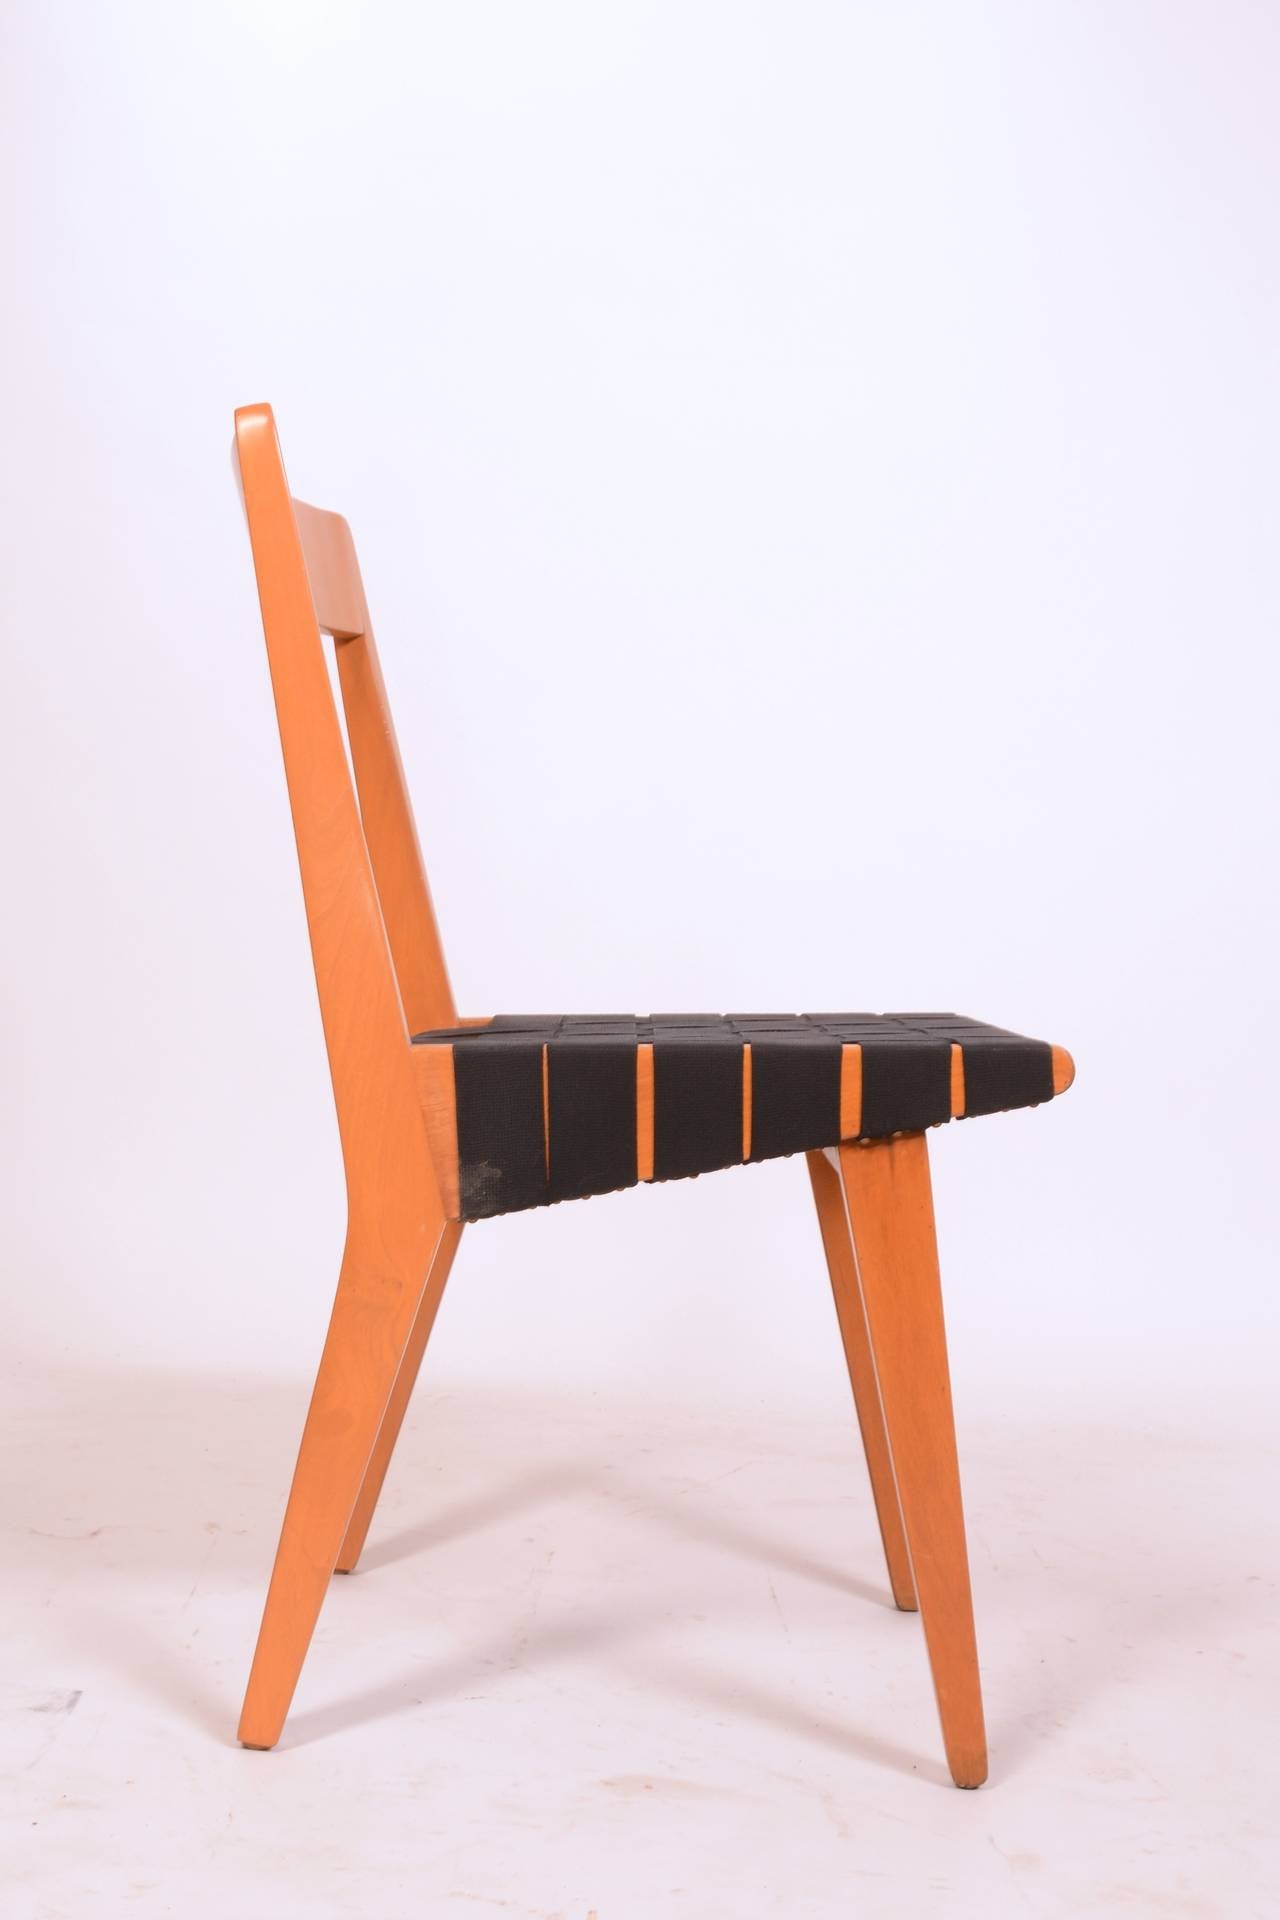 Rare Jens Risom chairs made in the 1940s, model “666” of the 600 series from 1941.